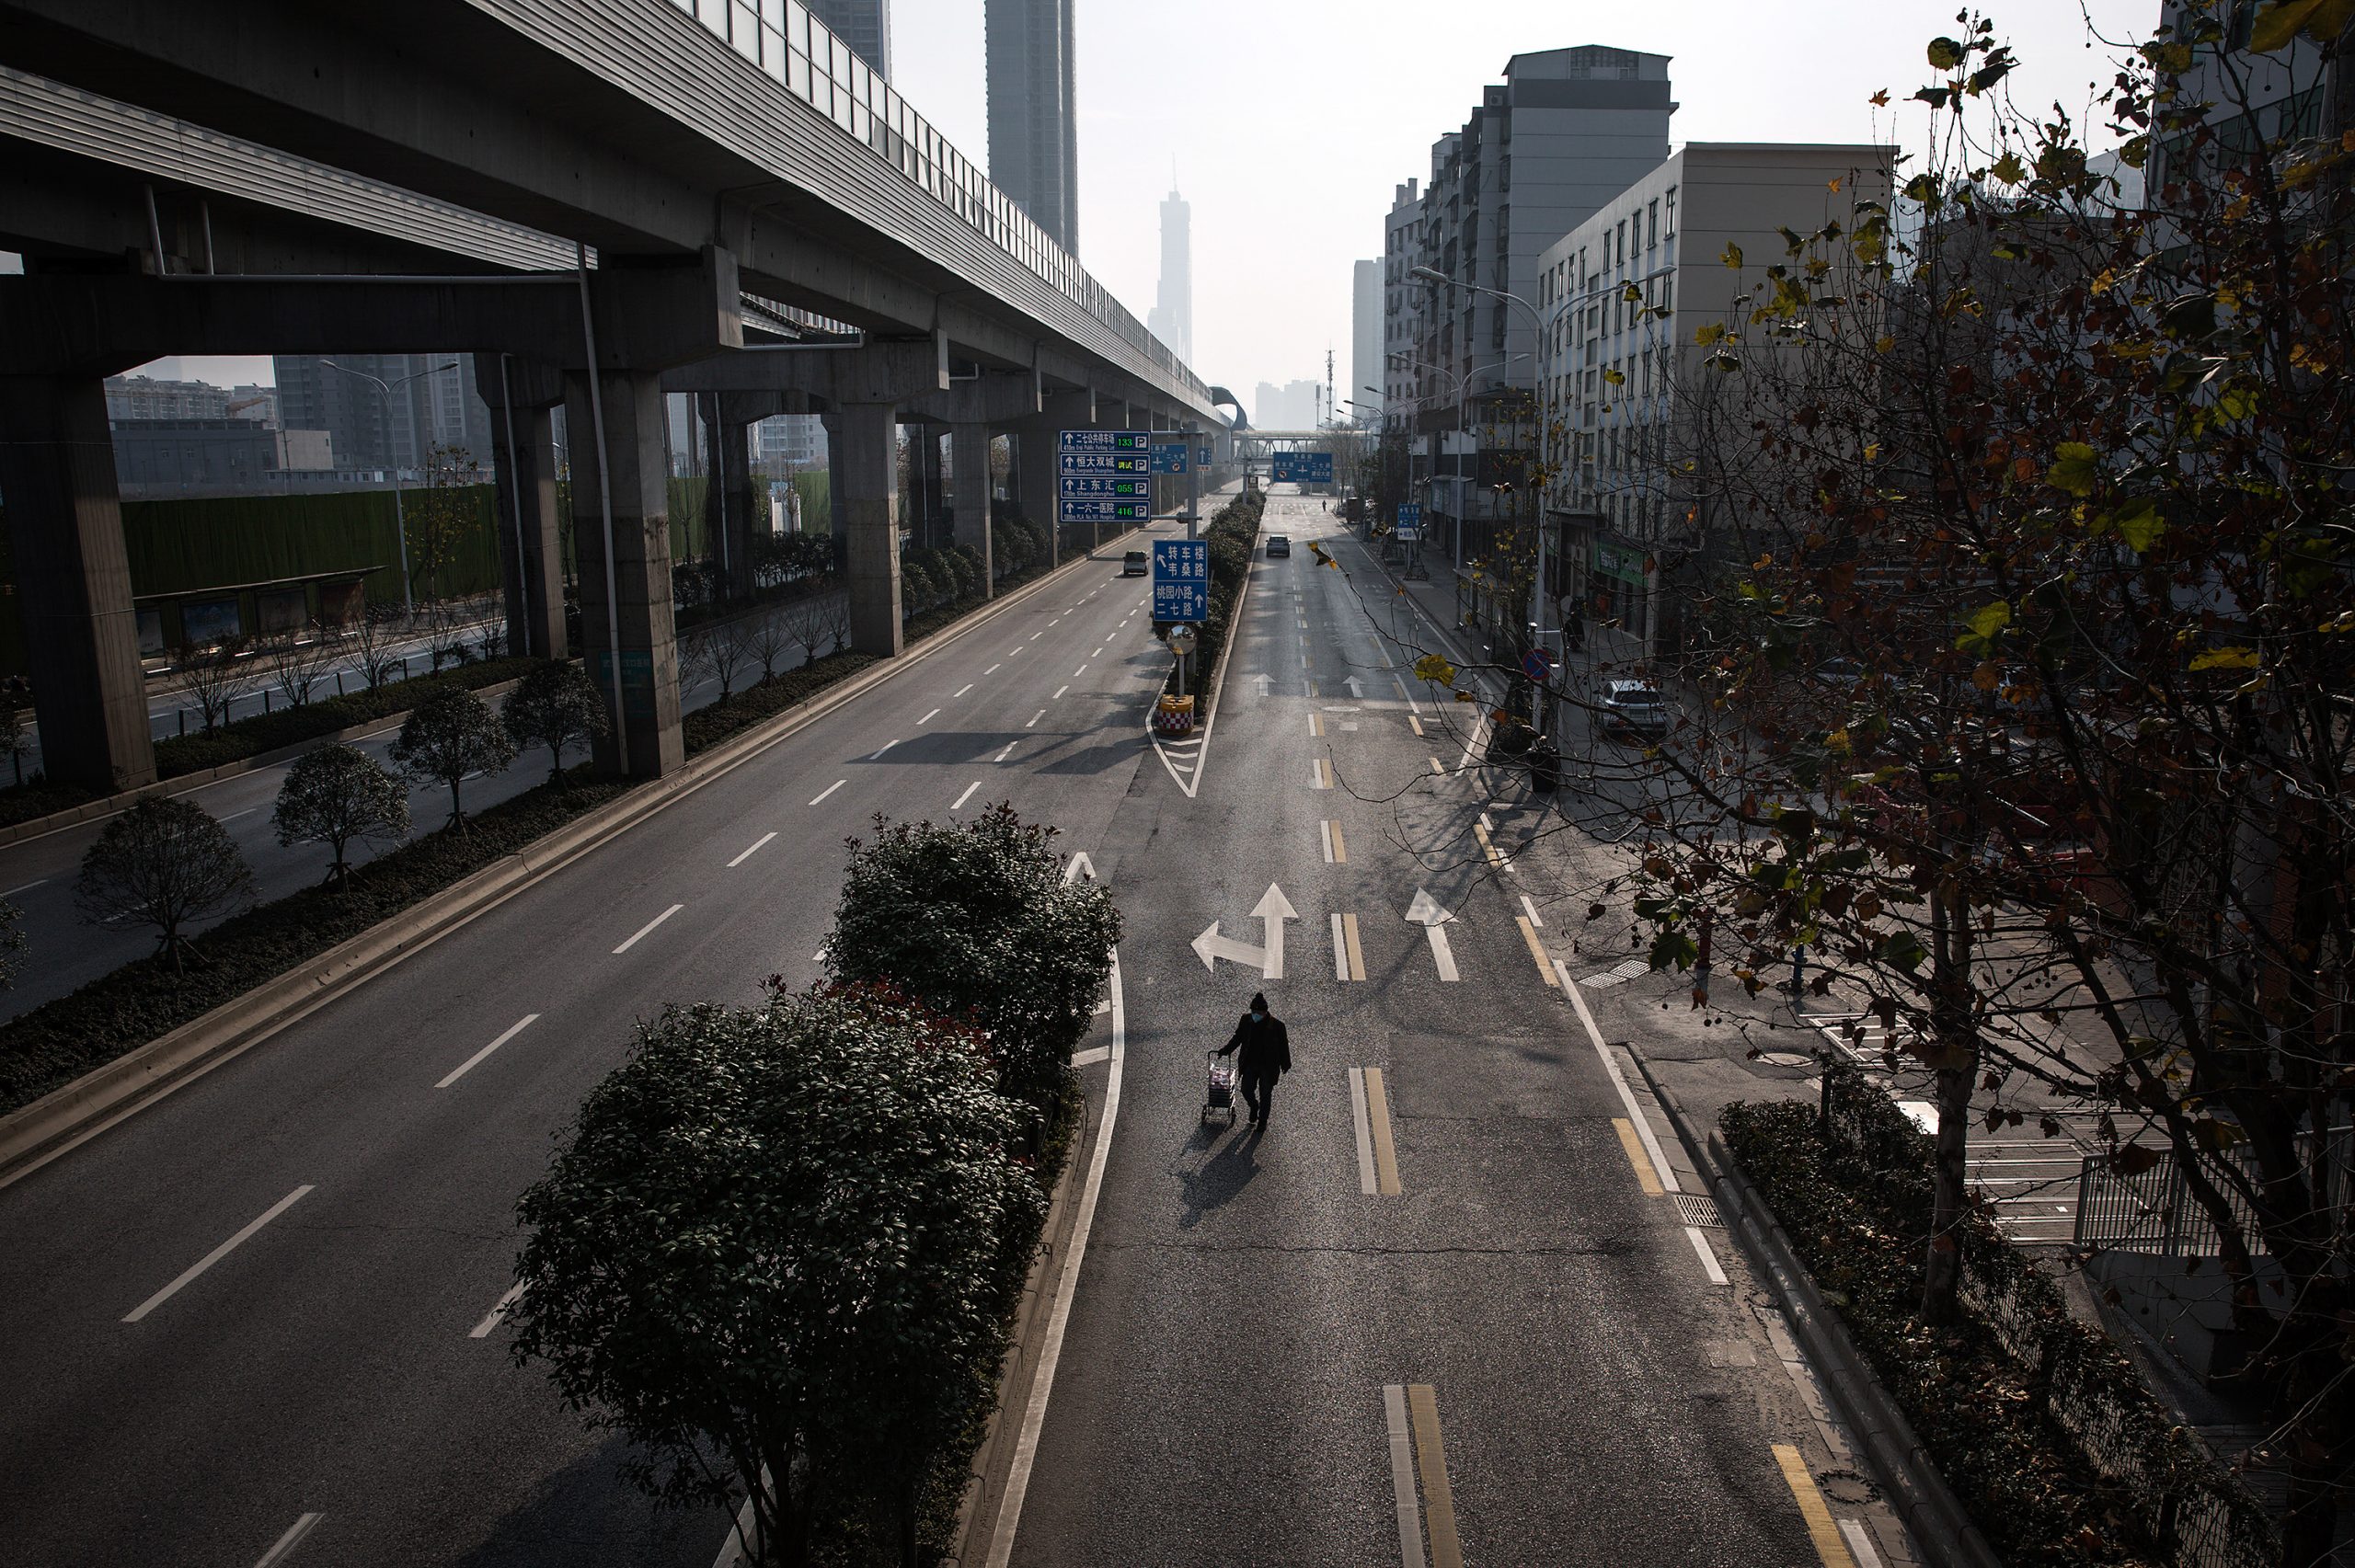 The government lockdown orders in Wuhan, China, have emptied the city's streets.